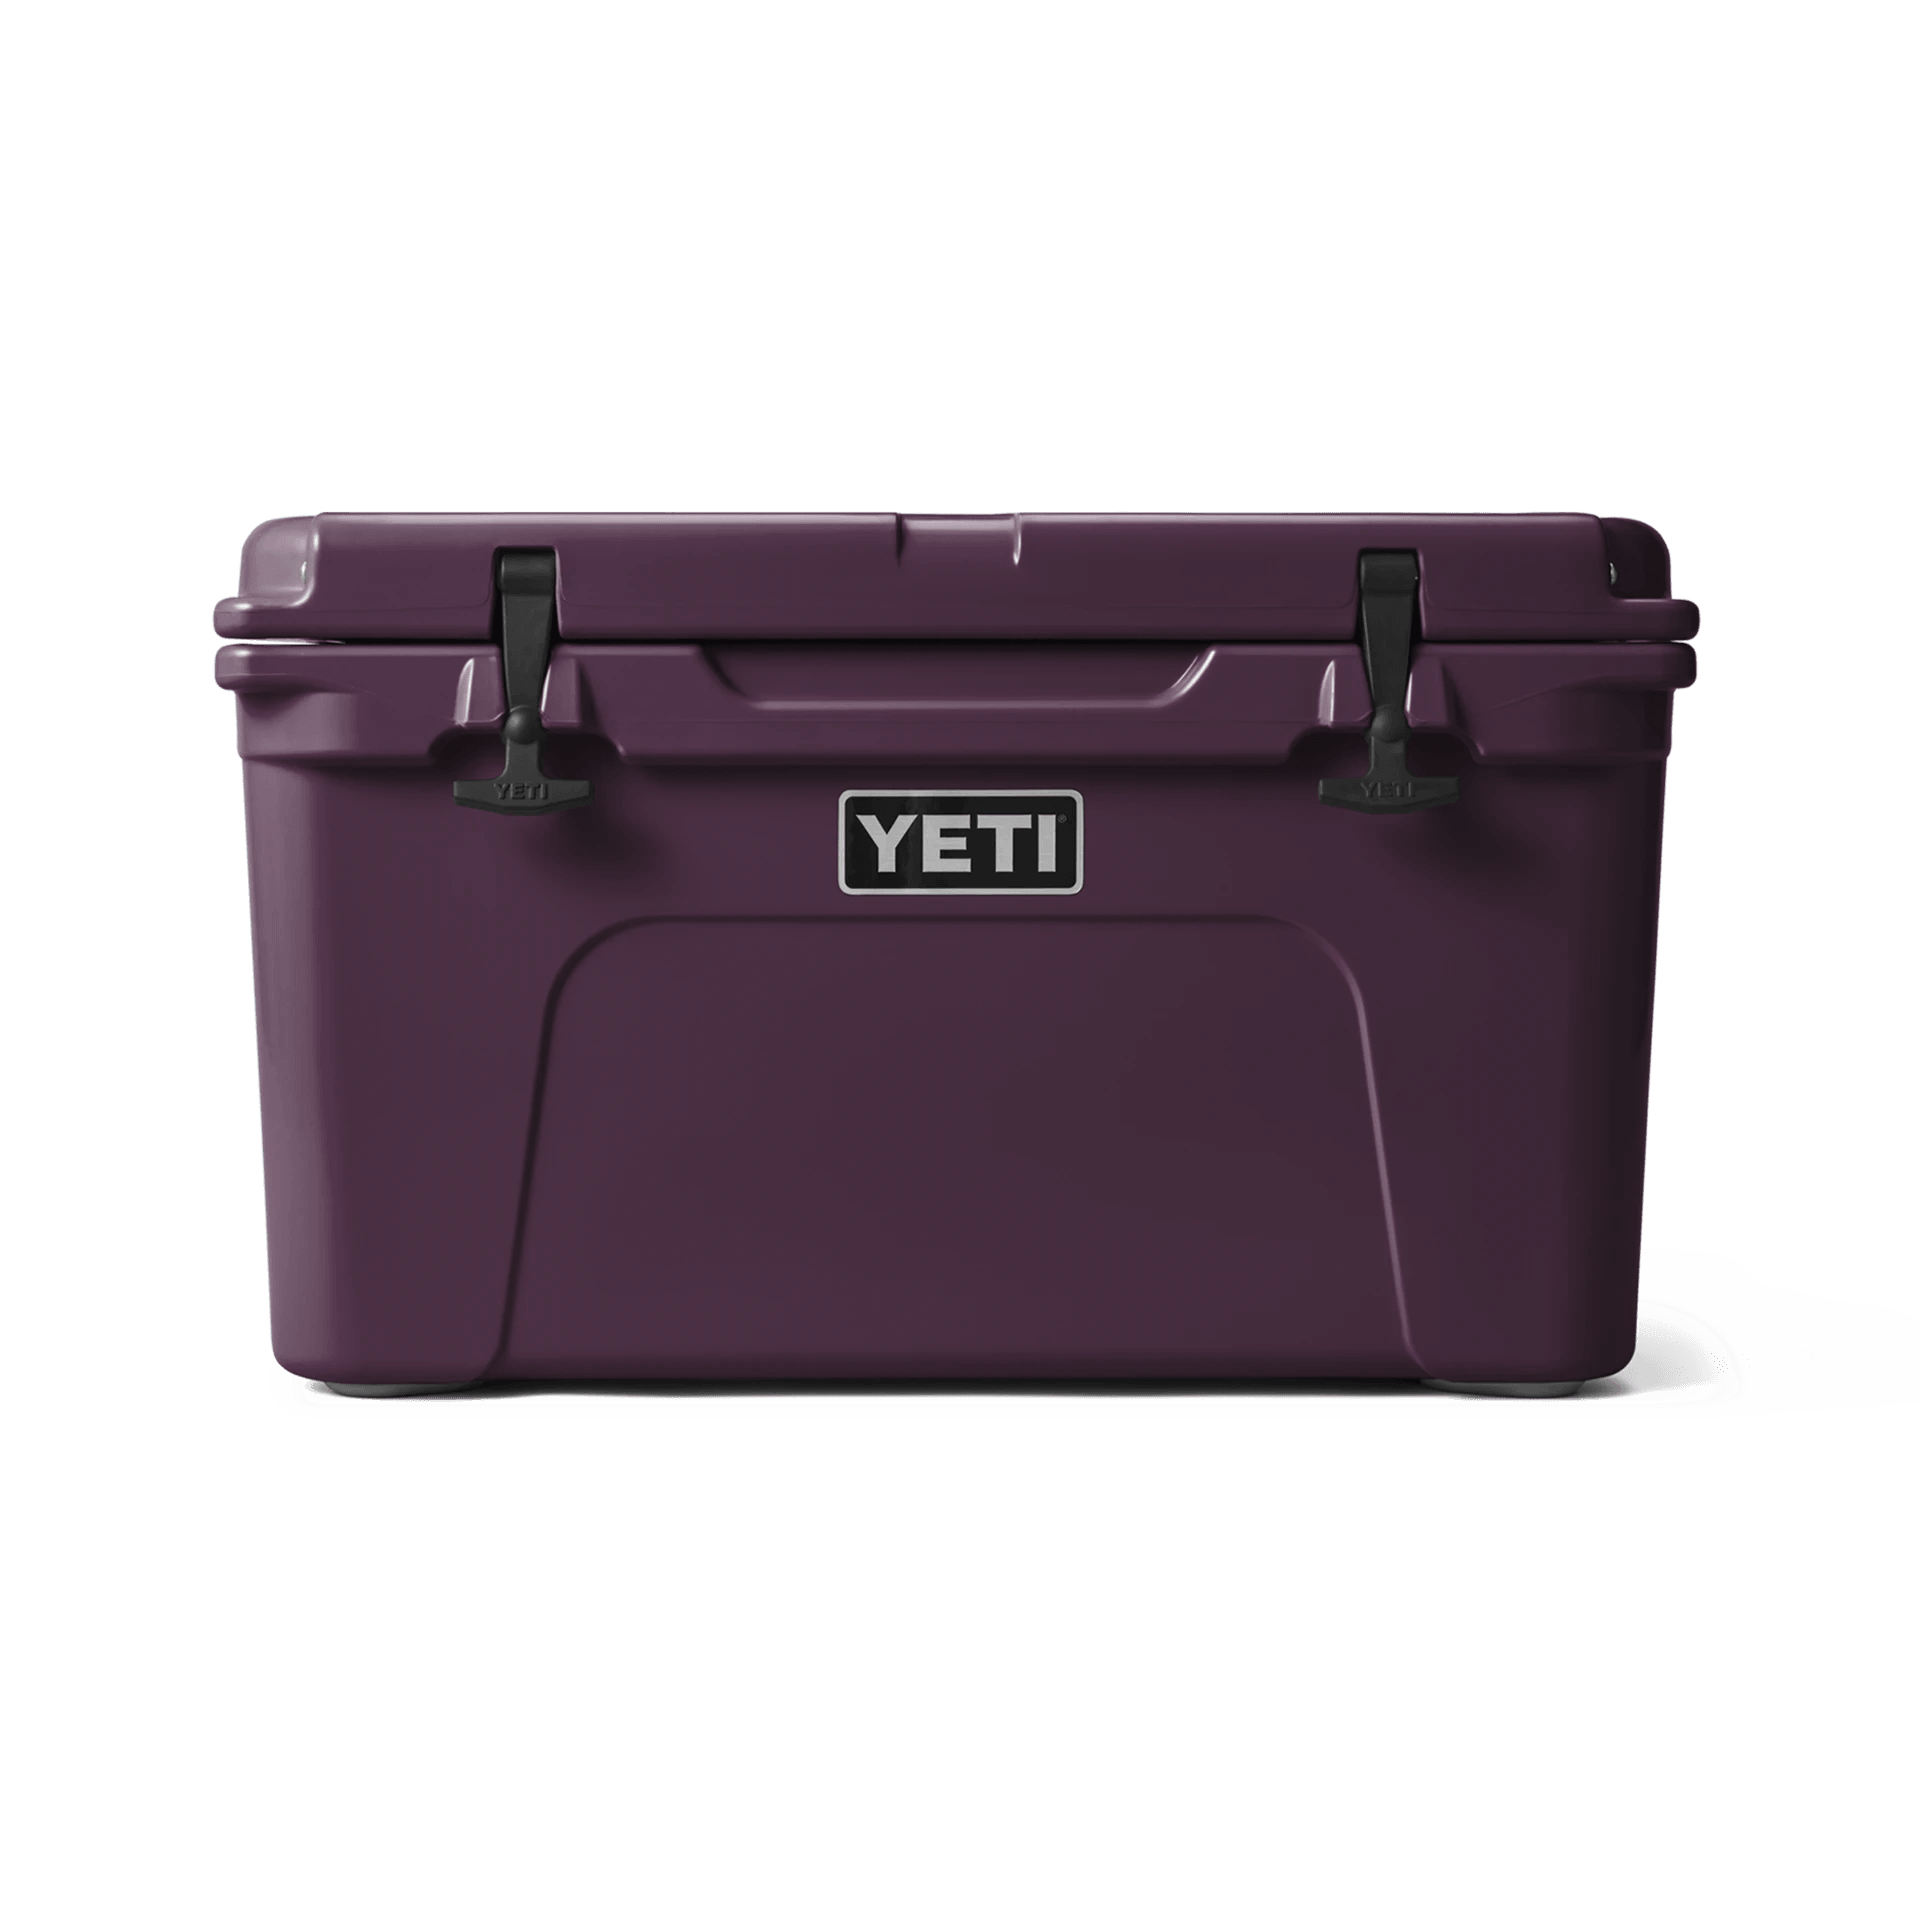 Tundra Hard Sided Cooler - The Salty Mare